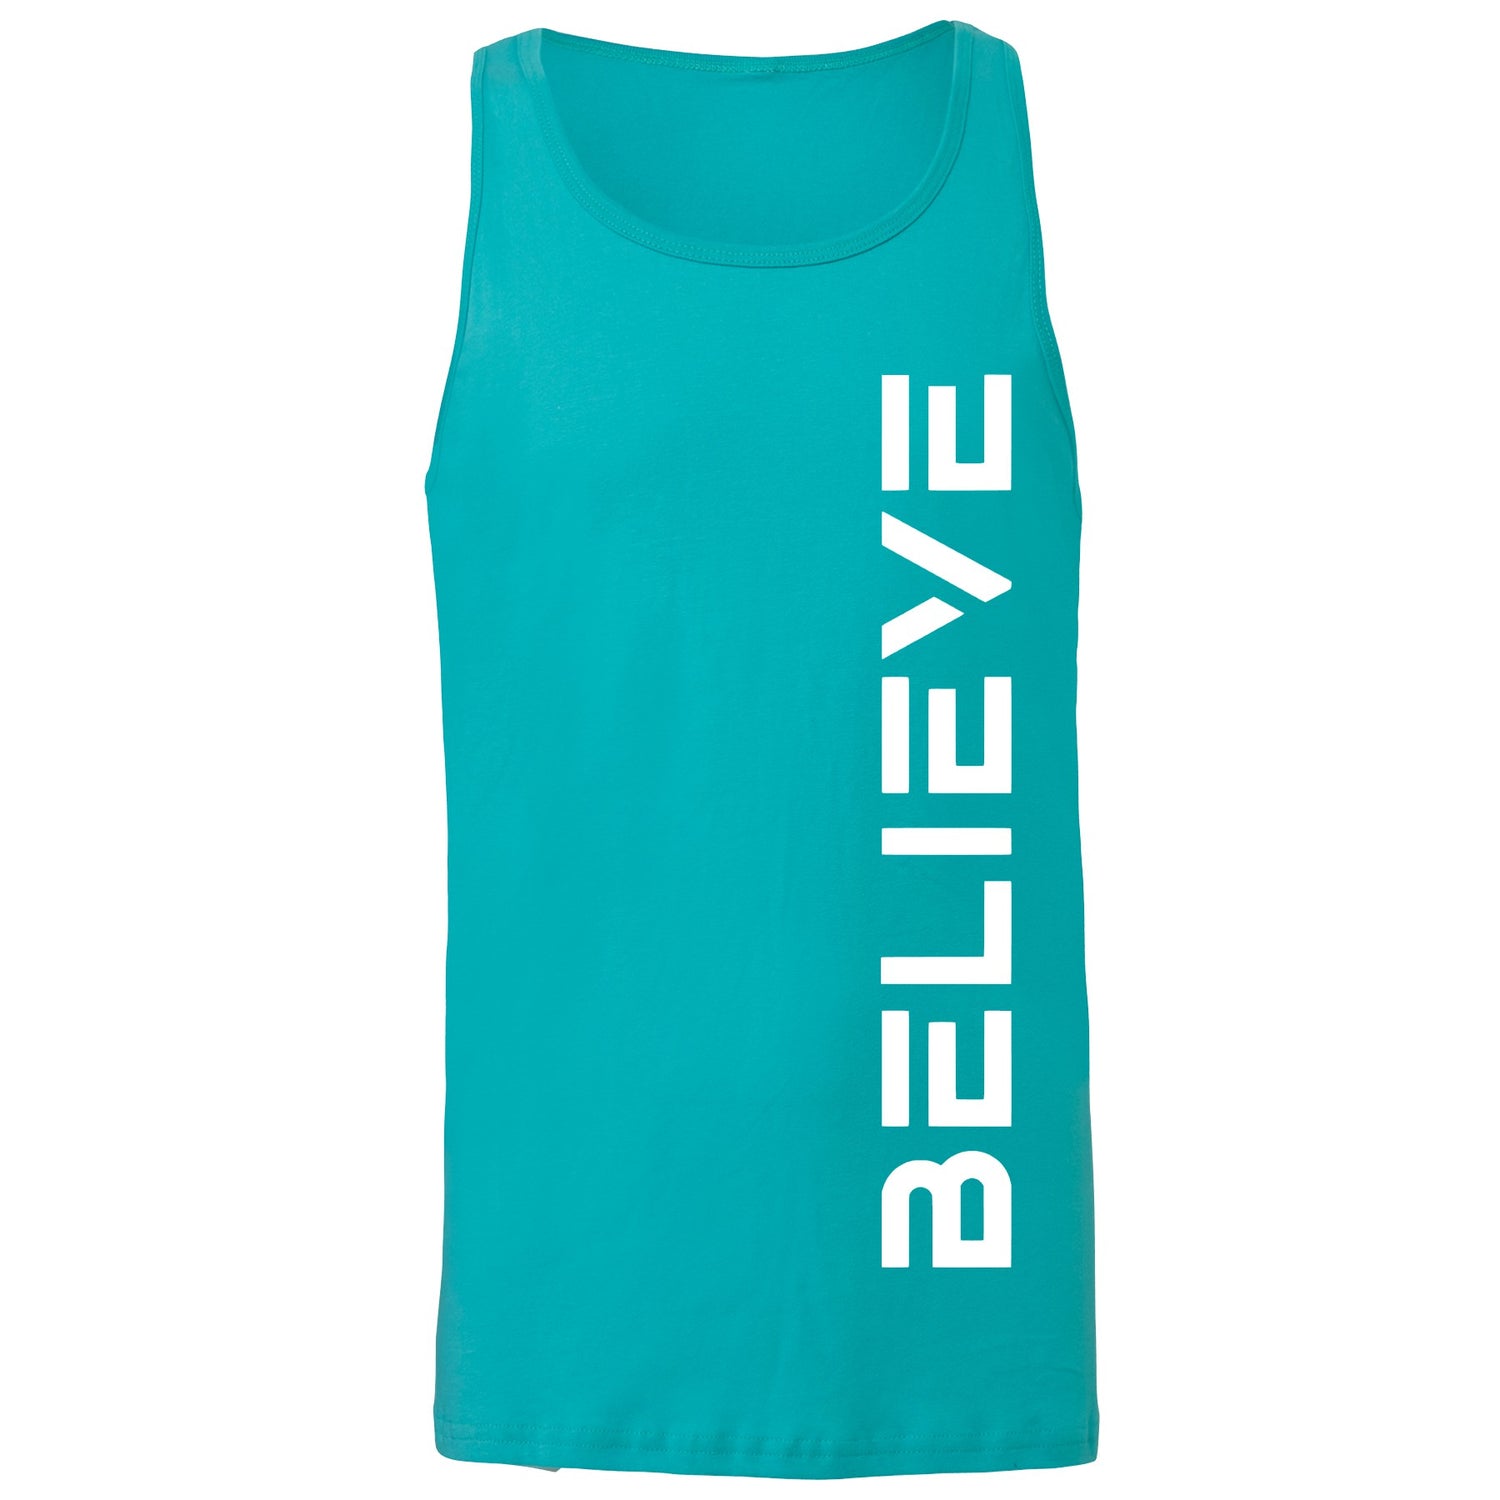 Profyle District - Believe - Tanks - Teal